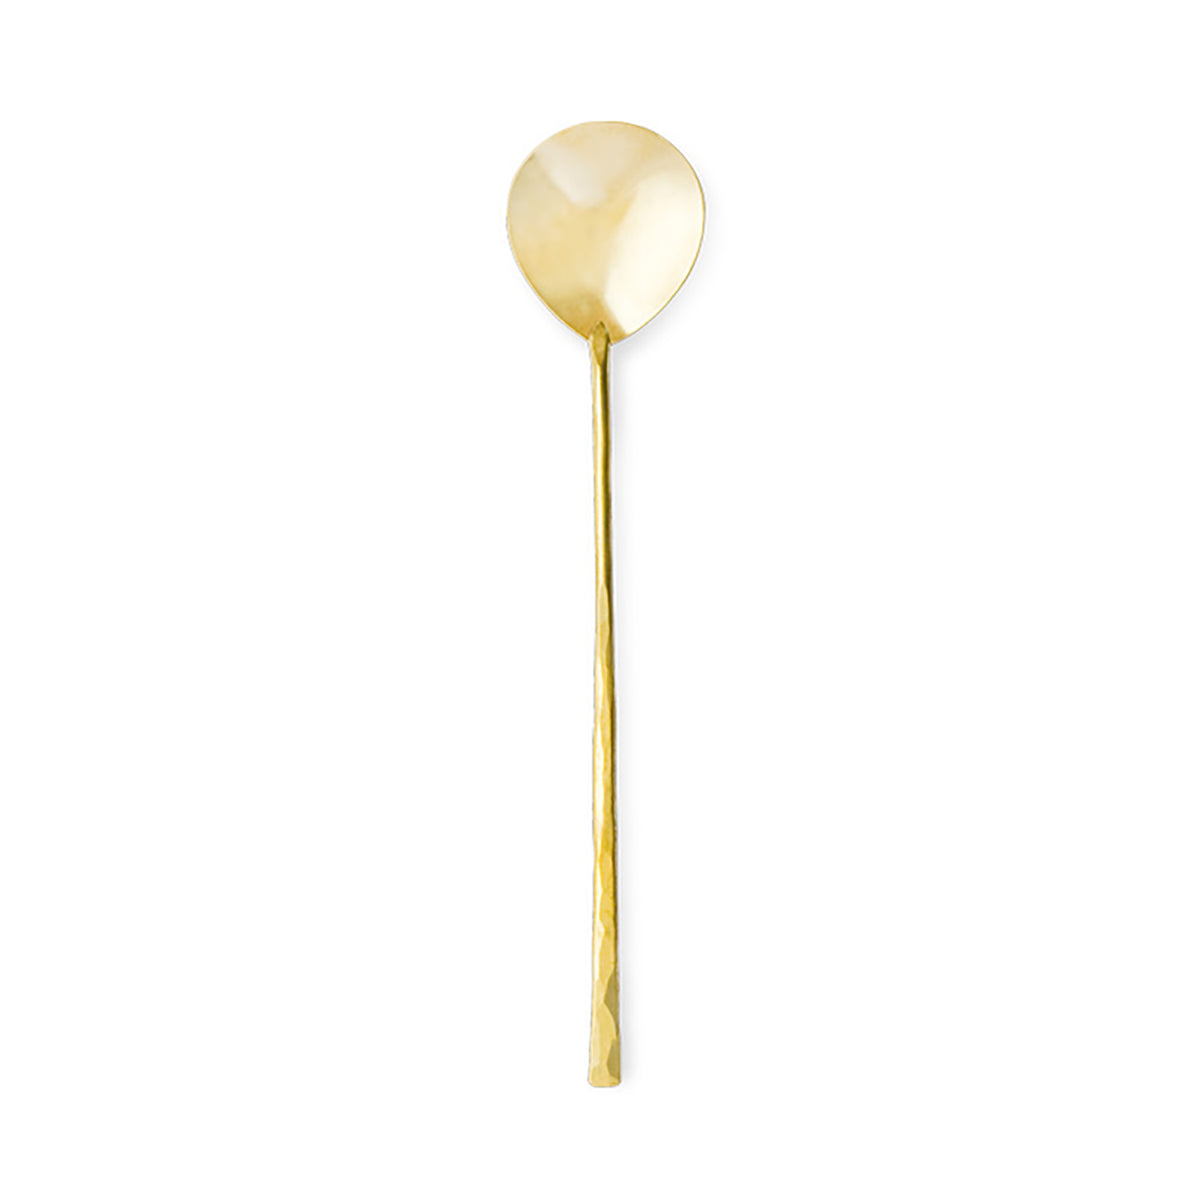 LUE Brass Dinner and Table Spoon Sets